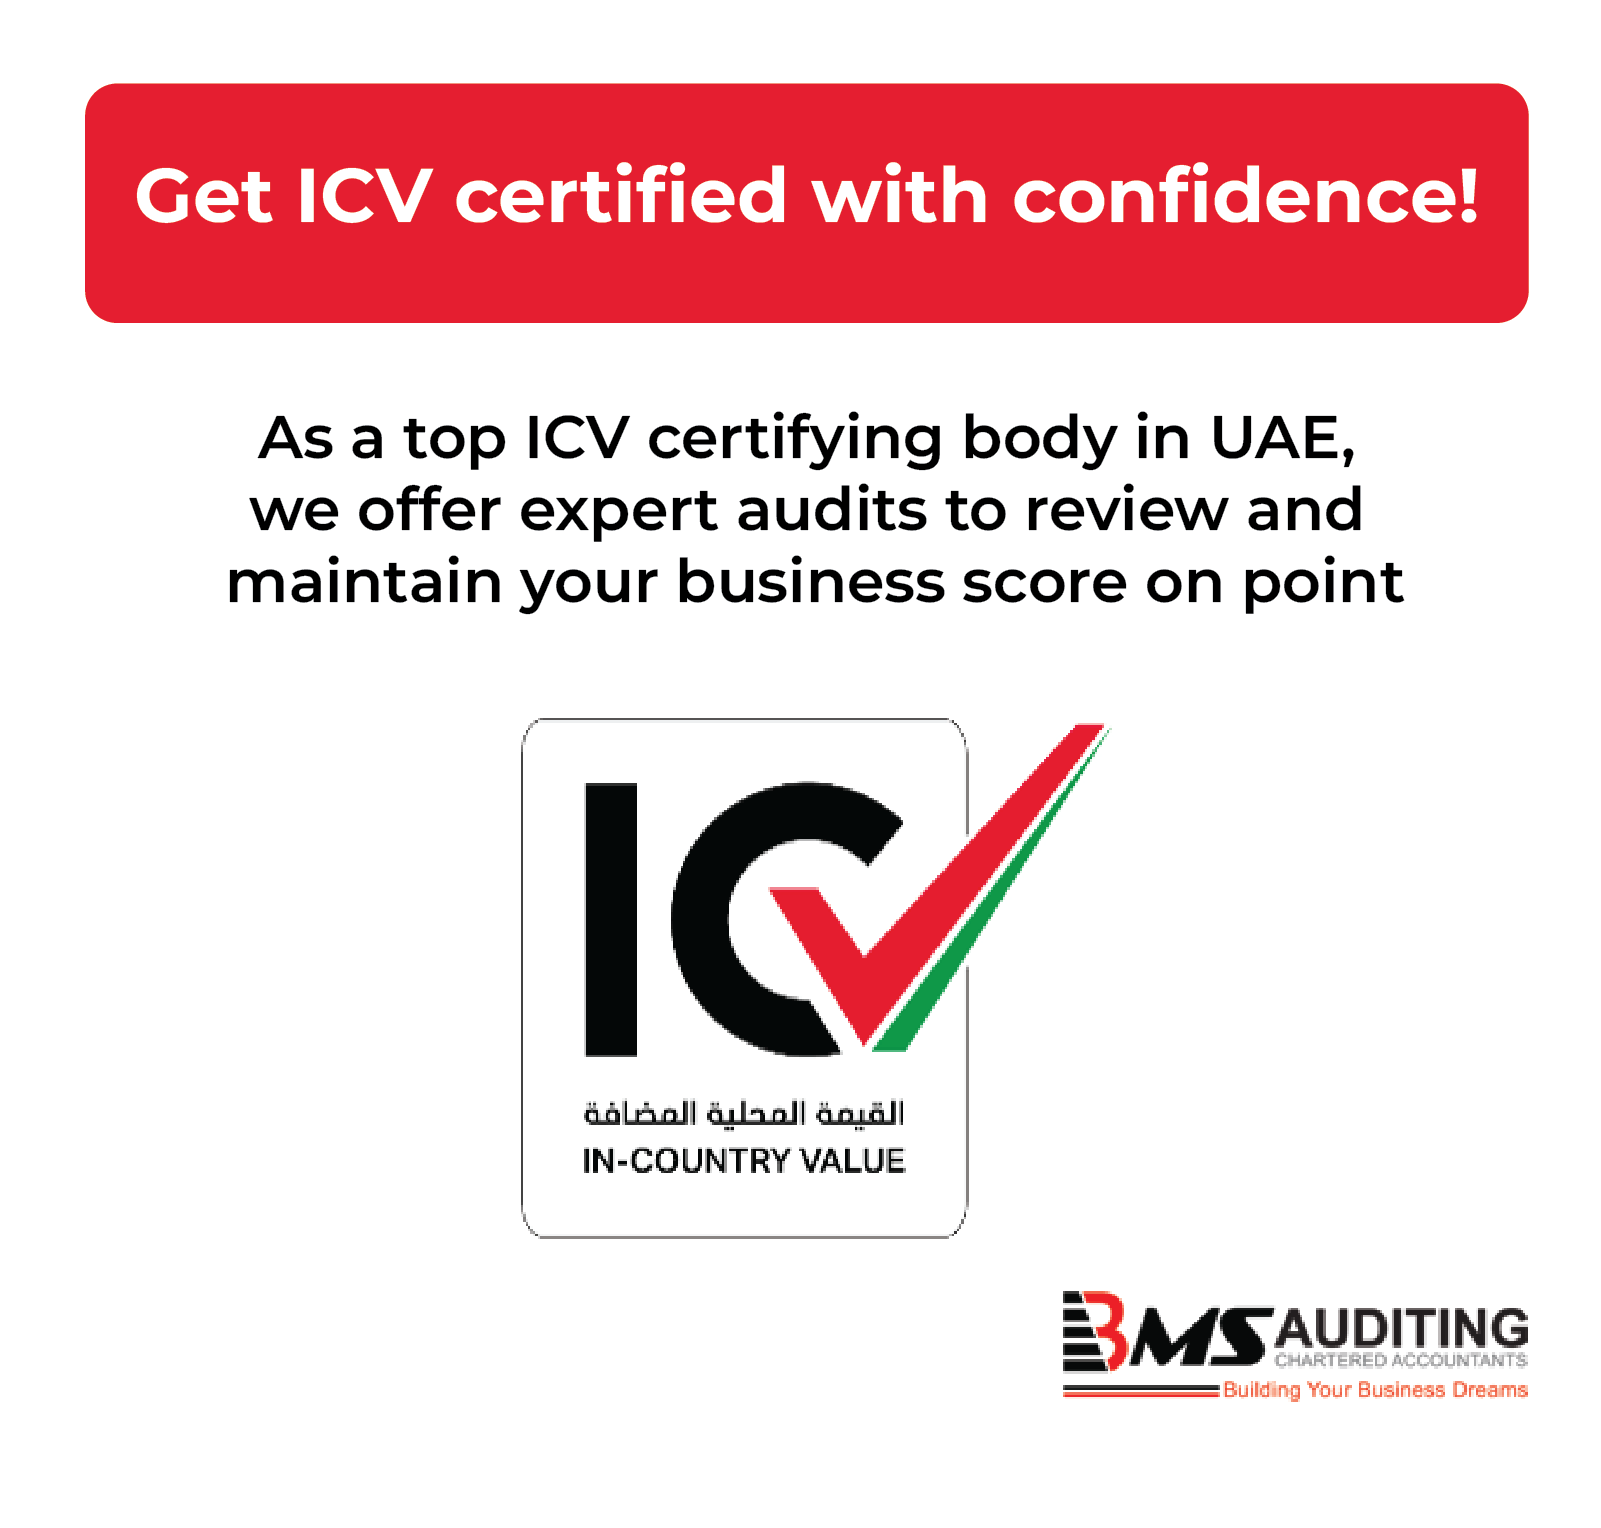 Image describing that BMS Auditing is the top ADNOC accredited ICV certifying Body in the UAE